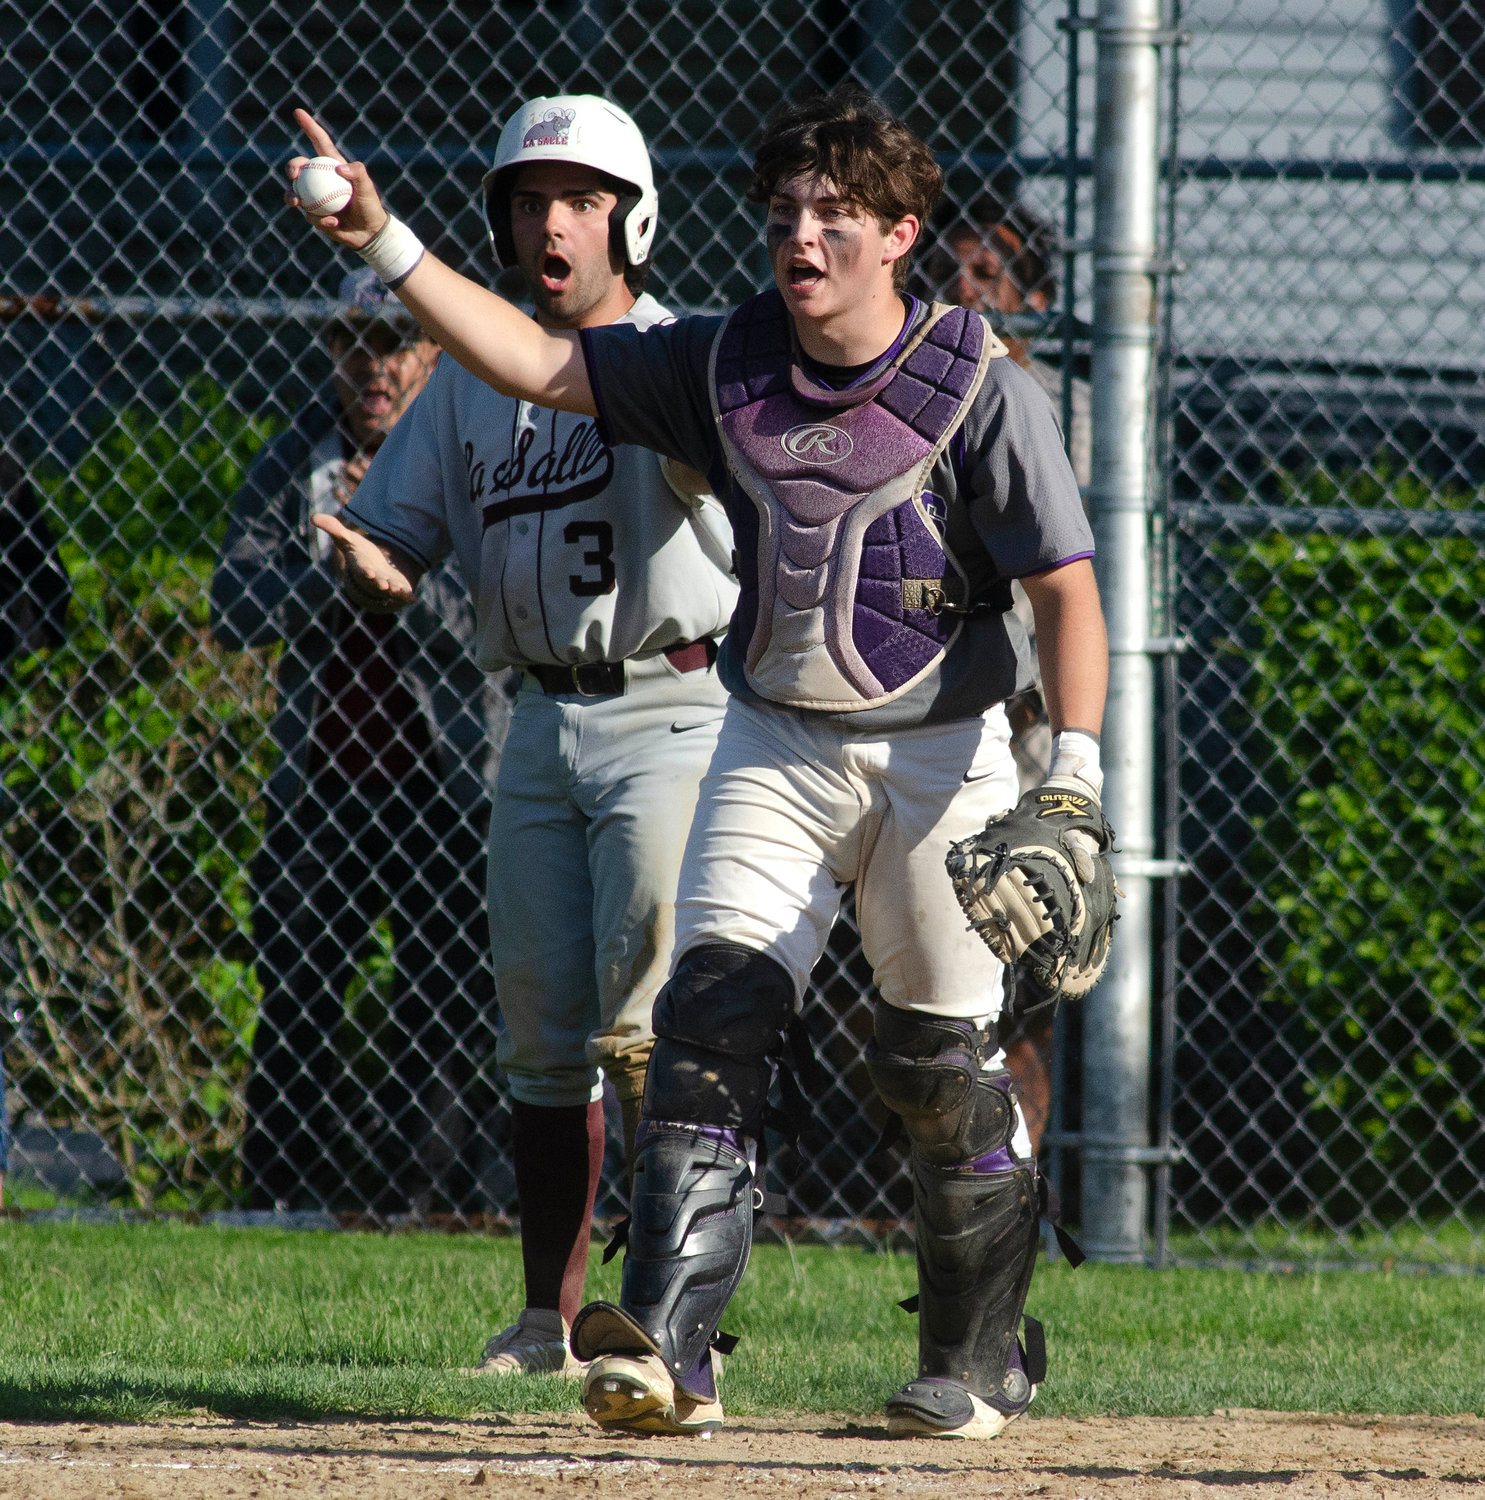 Senior catcher Jack Standish turns to see La Salle's Shea Caton slide by home plate without tagging it as the Ram tagged up at third base and ran home on a fly ball to right field. Standish walked over to Caton and tagged him out for the second out of the fifth inning.